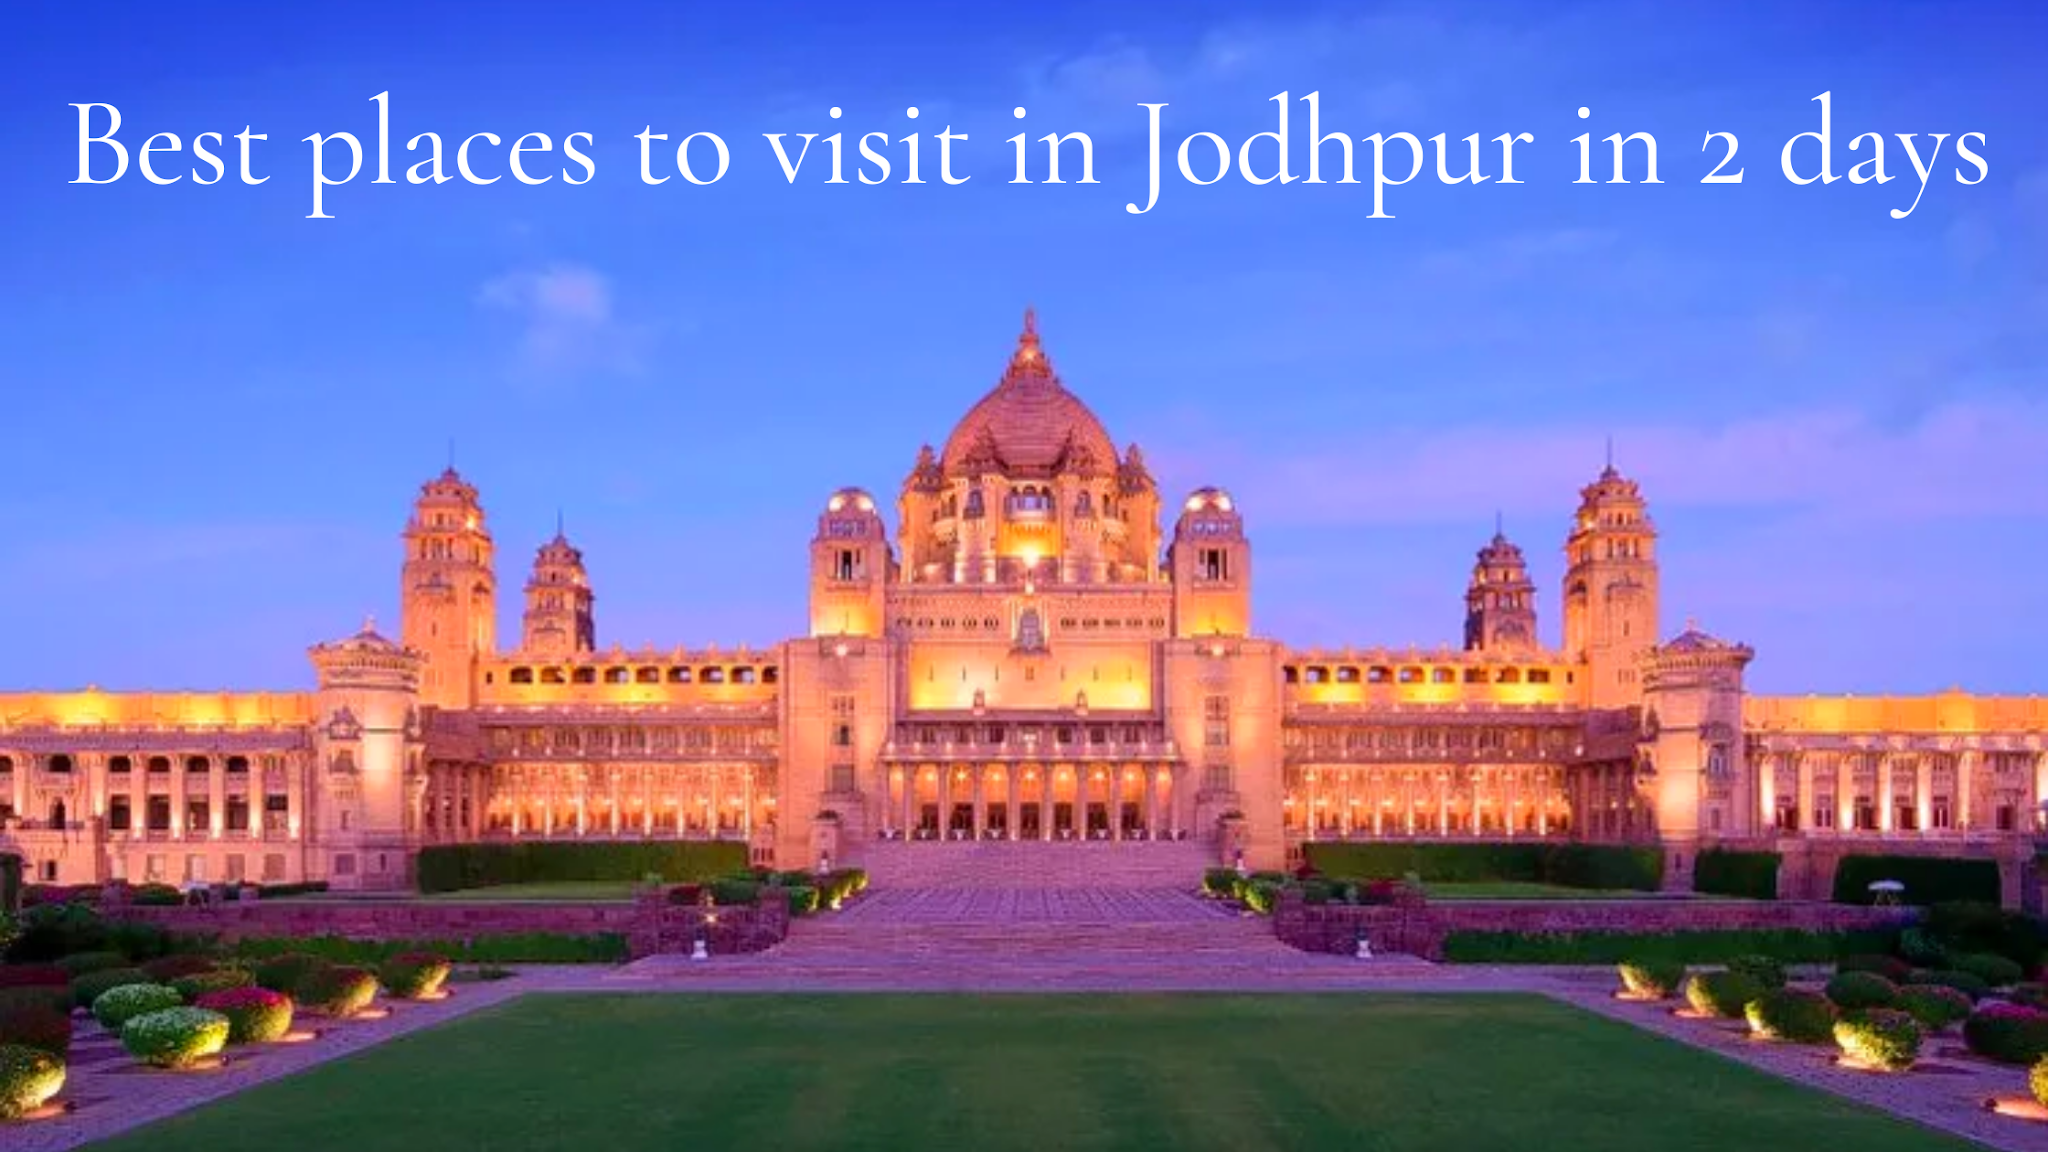 Best places to visit in Jodhpur in 2 days